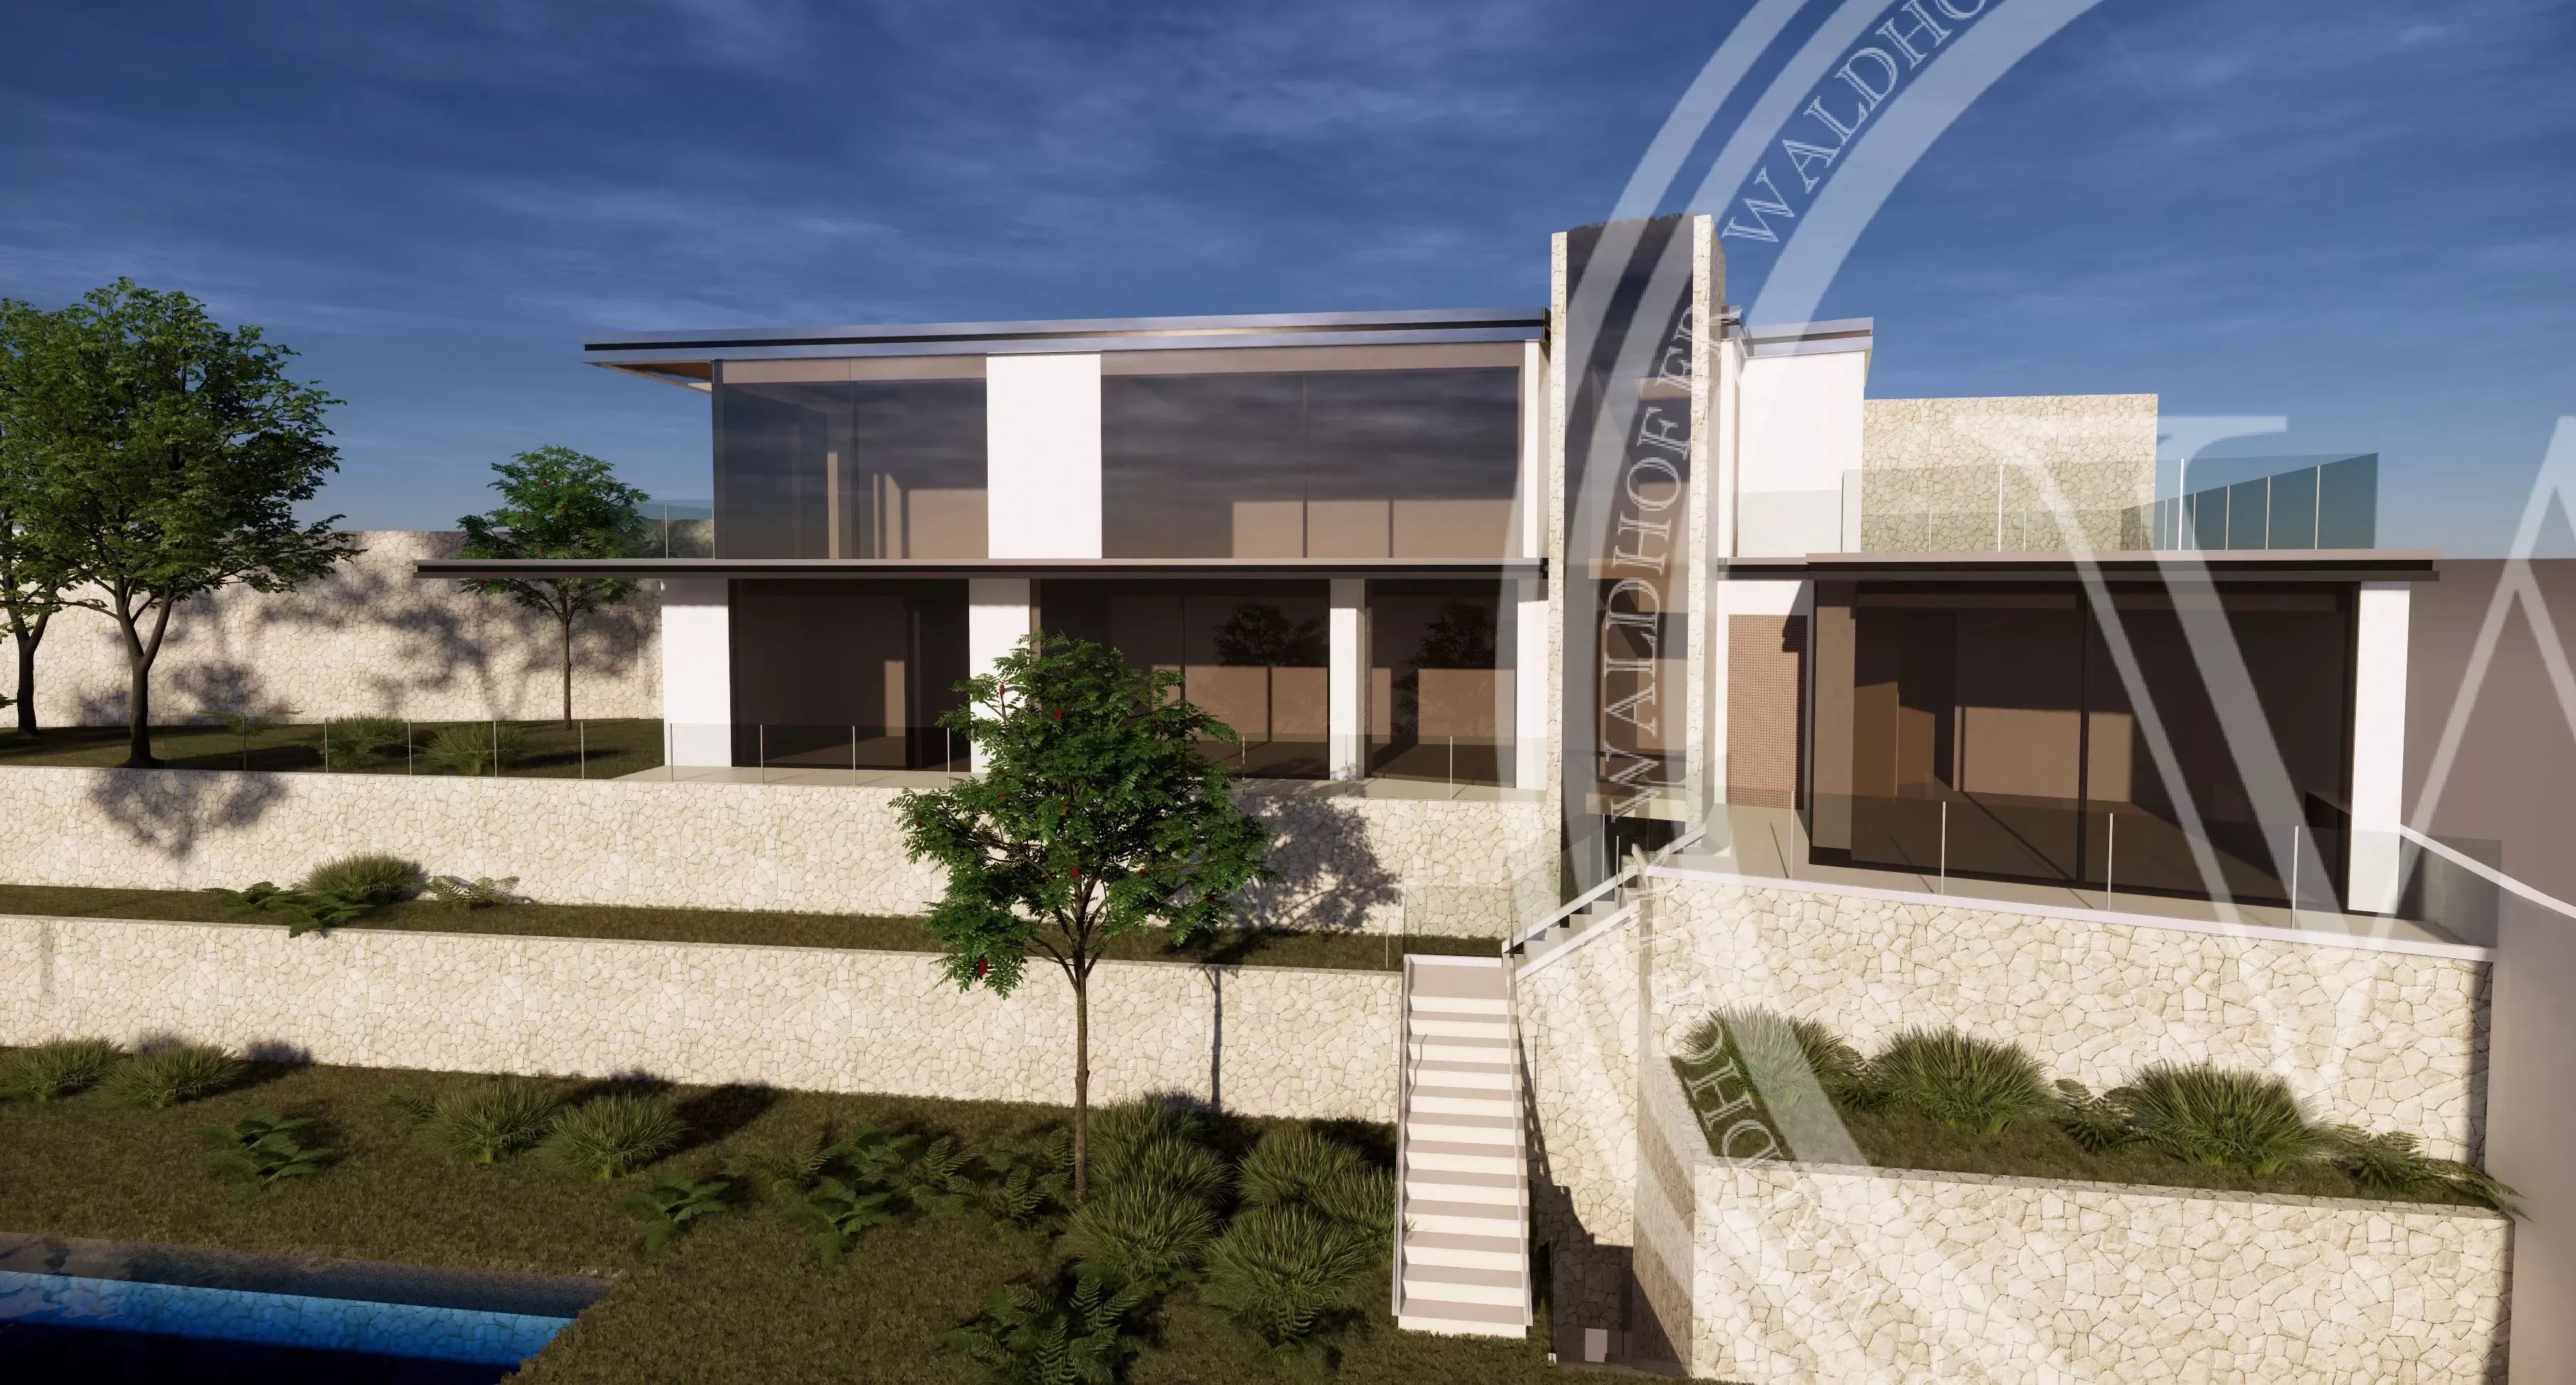 Renovation Project with approved permit near the Maybourne Riviera hotel